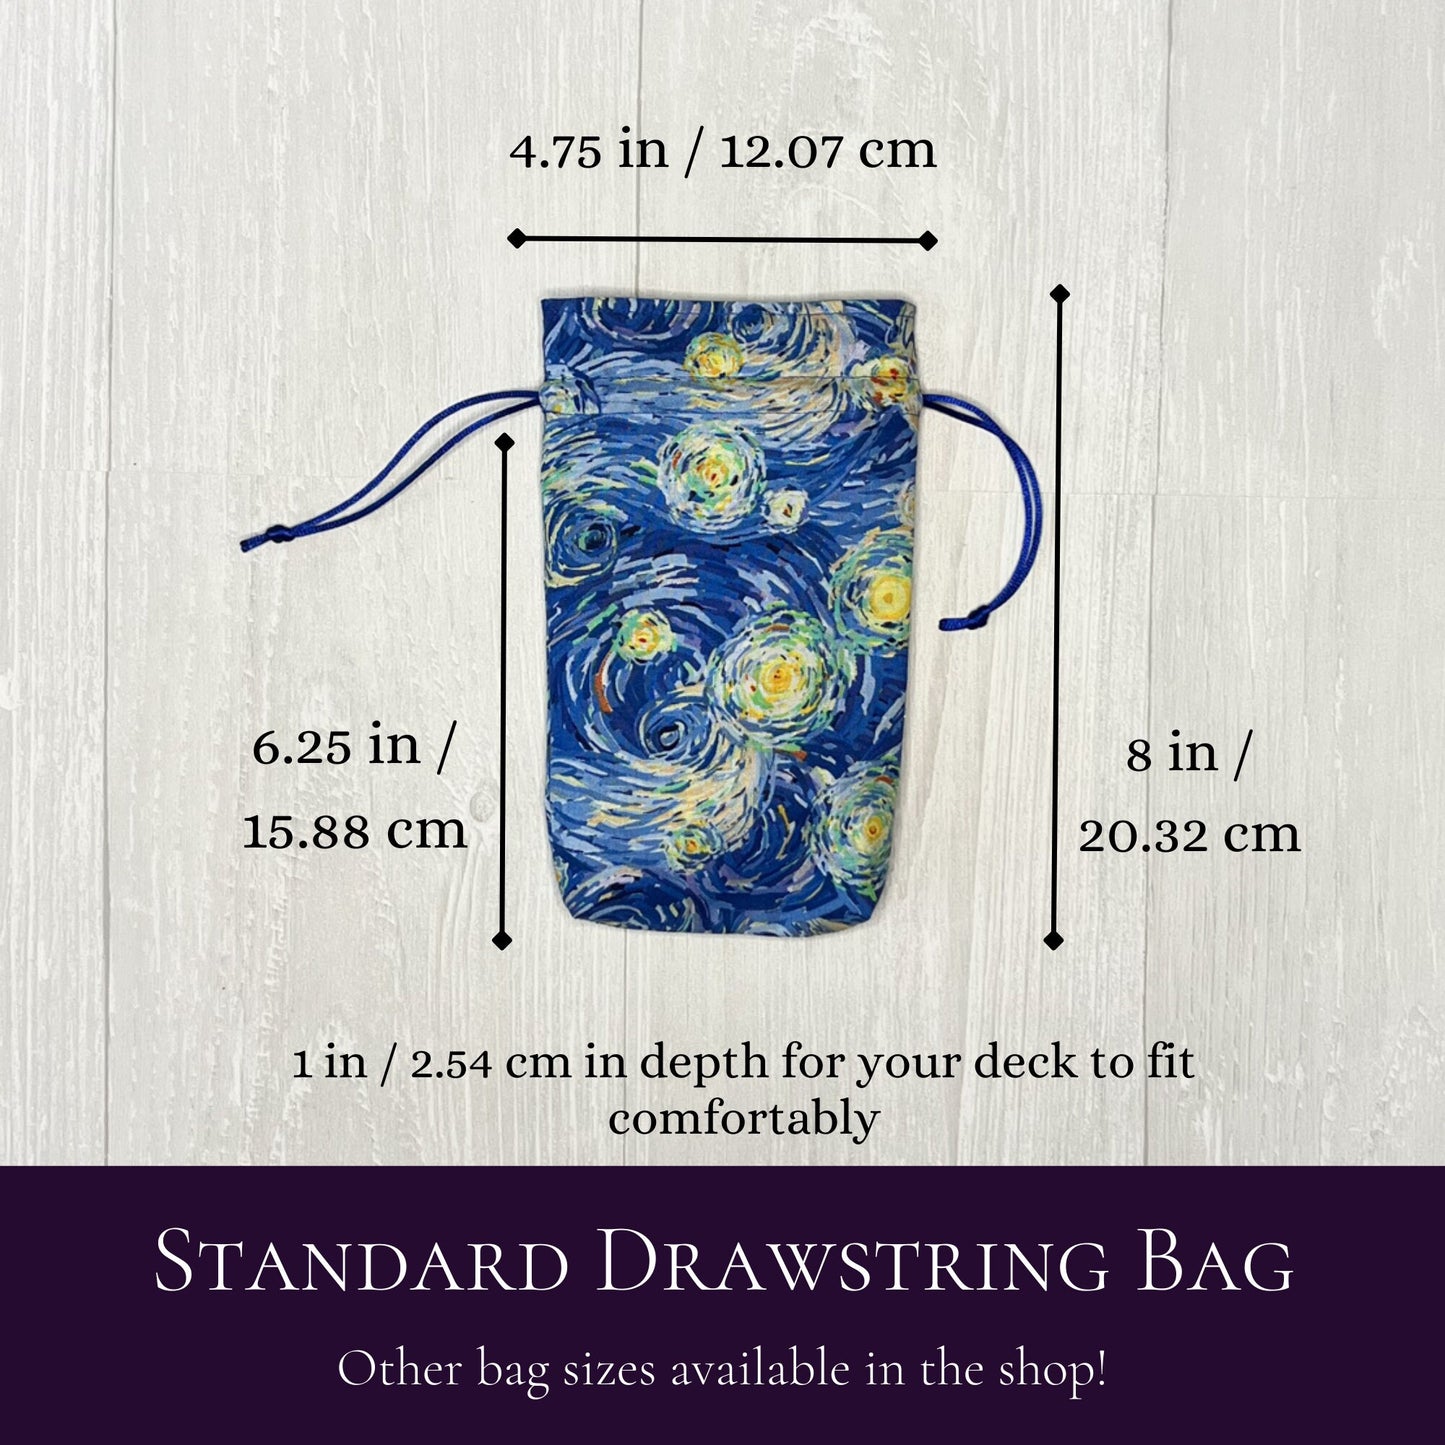 Starry Night Tarot Bag, Blue Van Gogh Drawstring Pouch, Tarot Deck Storage Holder, Pagan Witchcraft Wiccan Divination Tools Gifts & Supplies